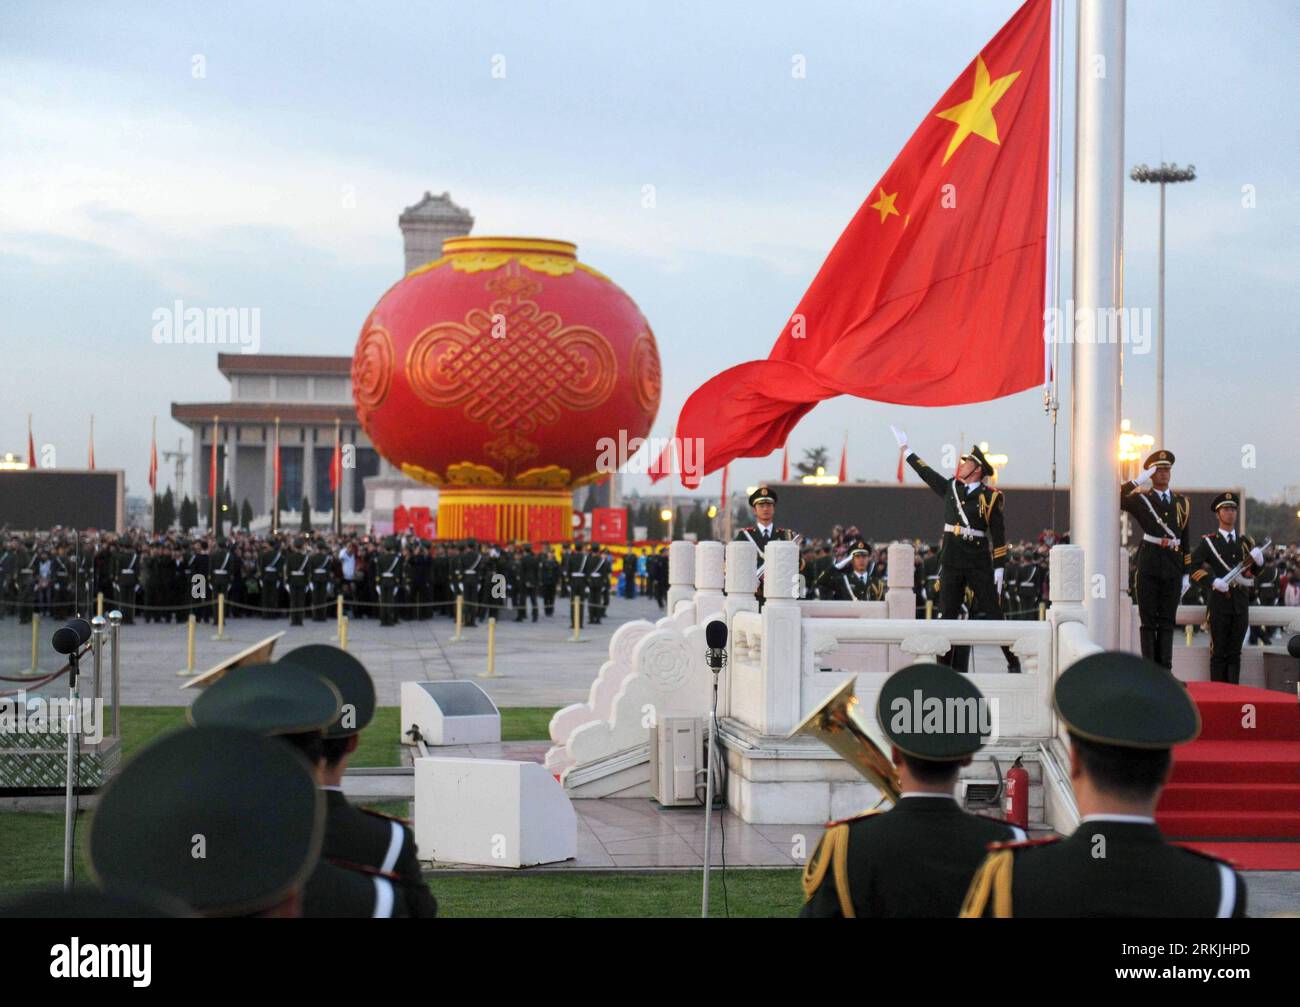 Bildnummer: 56138815  Datum: 01.10.2011  Copyright: imago/Xinhua (111001) -- BEIJING, Oct. 1, 2011 (Xinhua) -- Chinese national flag is raised at the Tian anmen Square in Beijing, capital of China, Oct. 1, 2011. More than 120,000 gathered at the Tian anmen Square to watch the national flag raising ceremony at dawn on Oct. 1, in celebration of the 62th anniversary of the founding of the People s Republic of China. (Xinhua/Luo Xiaoguang) (ly) CHINA-NATIONAL FLAG RAISING-NATIONAL DAY (CN) PUBLICATIONxNOTxINxCHN Gesellschaft Militär Fahnenappell Fahne Nationalfahne Appell Feiertag Nationalfeiertag Stock Photo